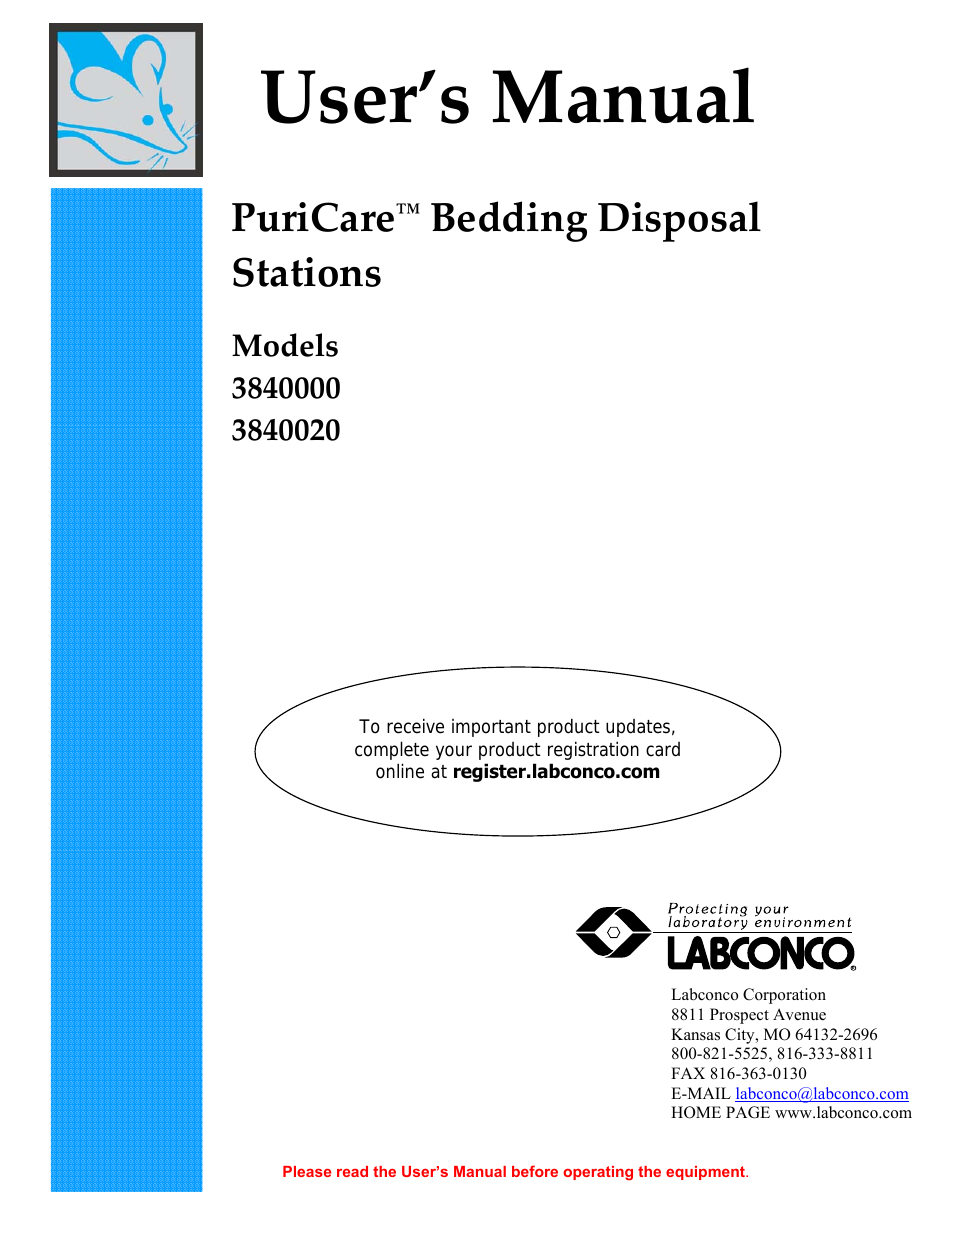 PuriCare Bedding Disposal Stations 3840000